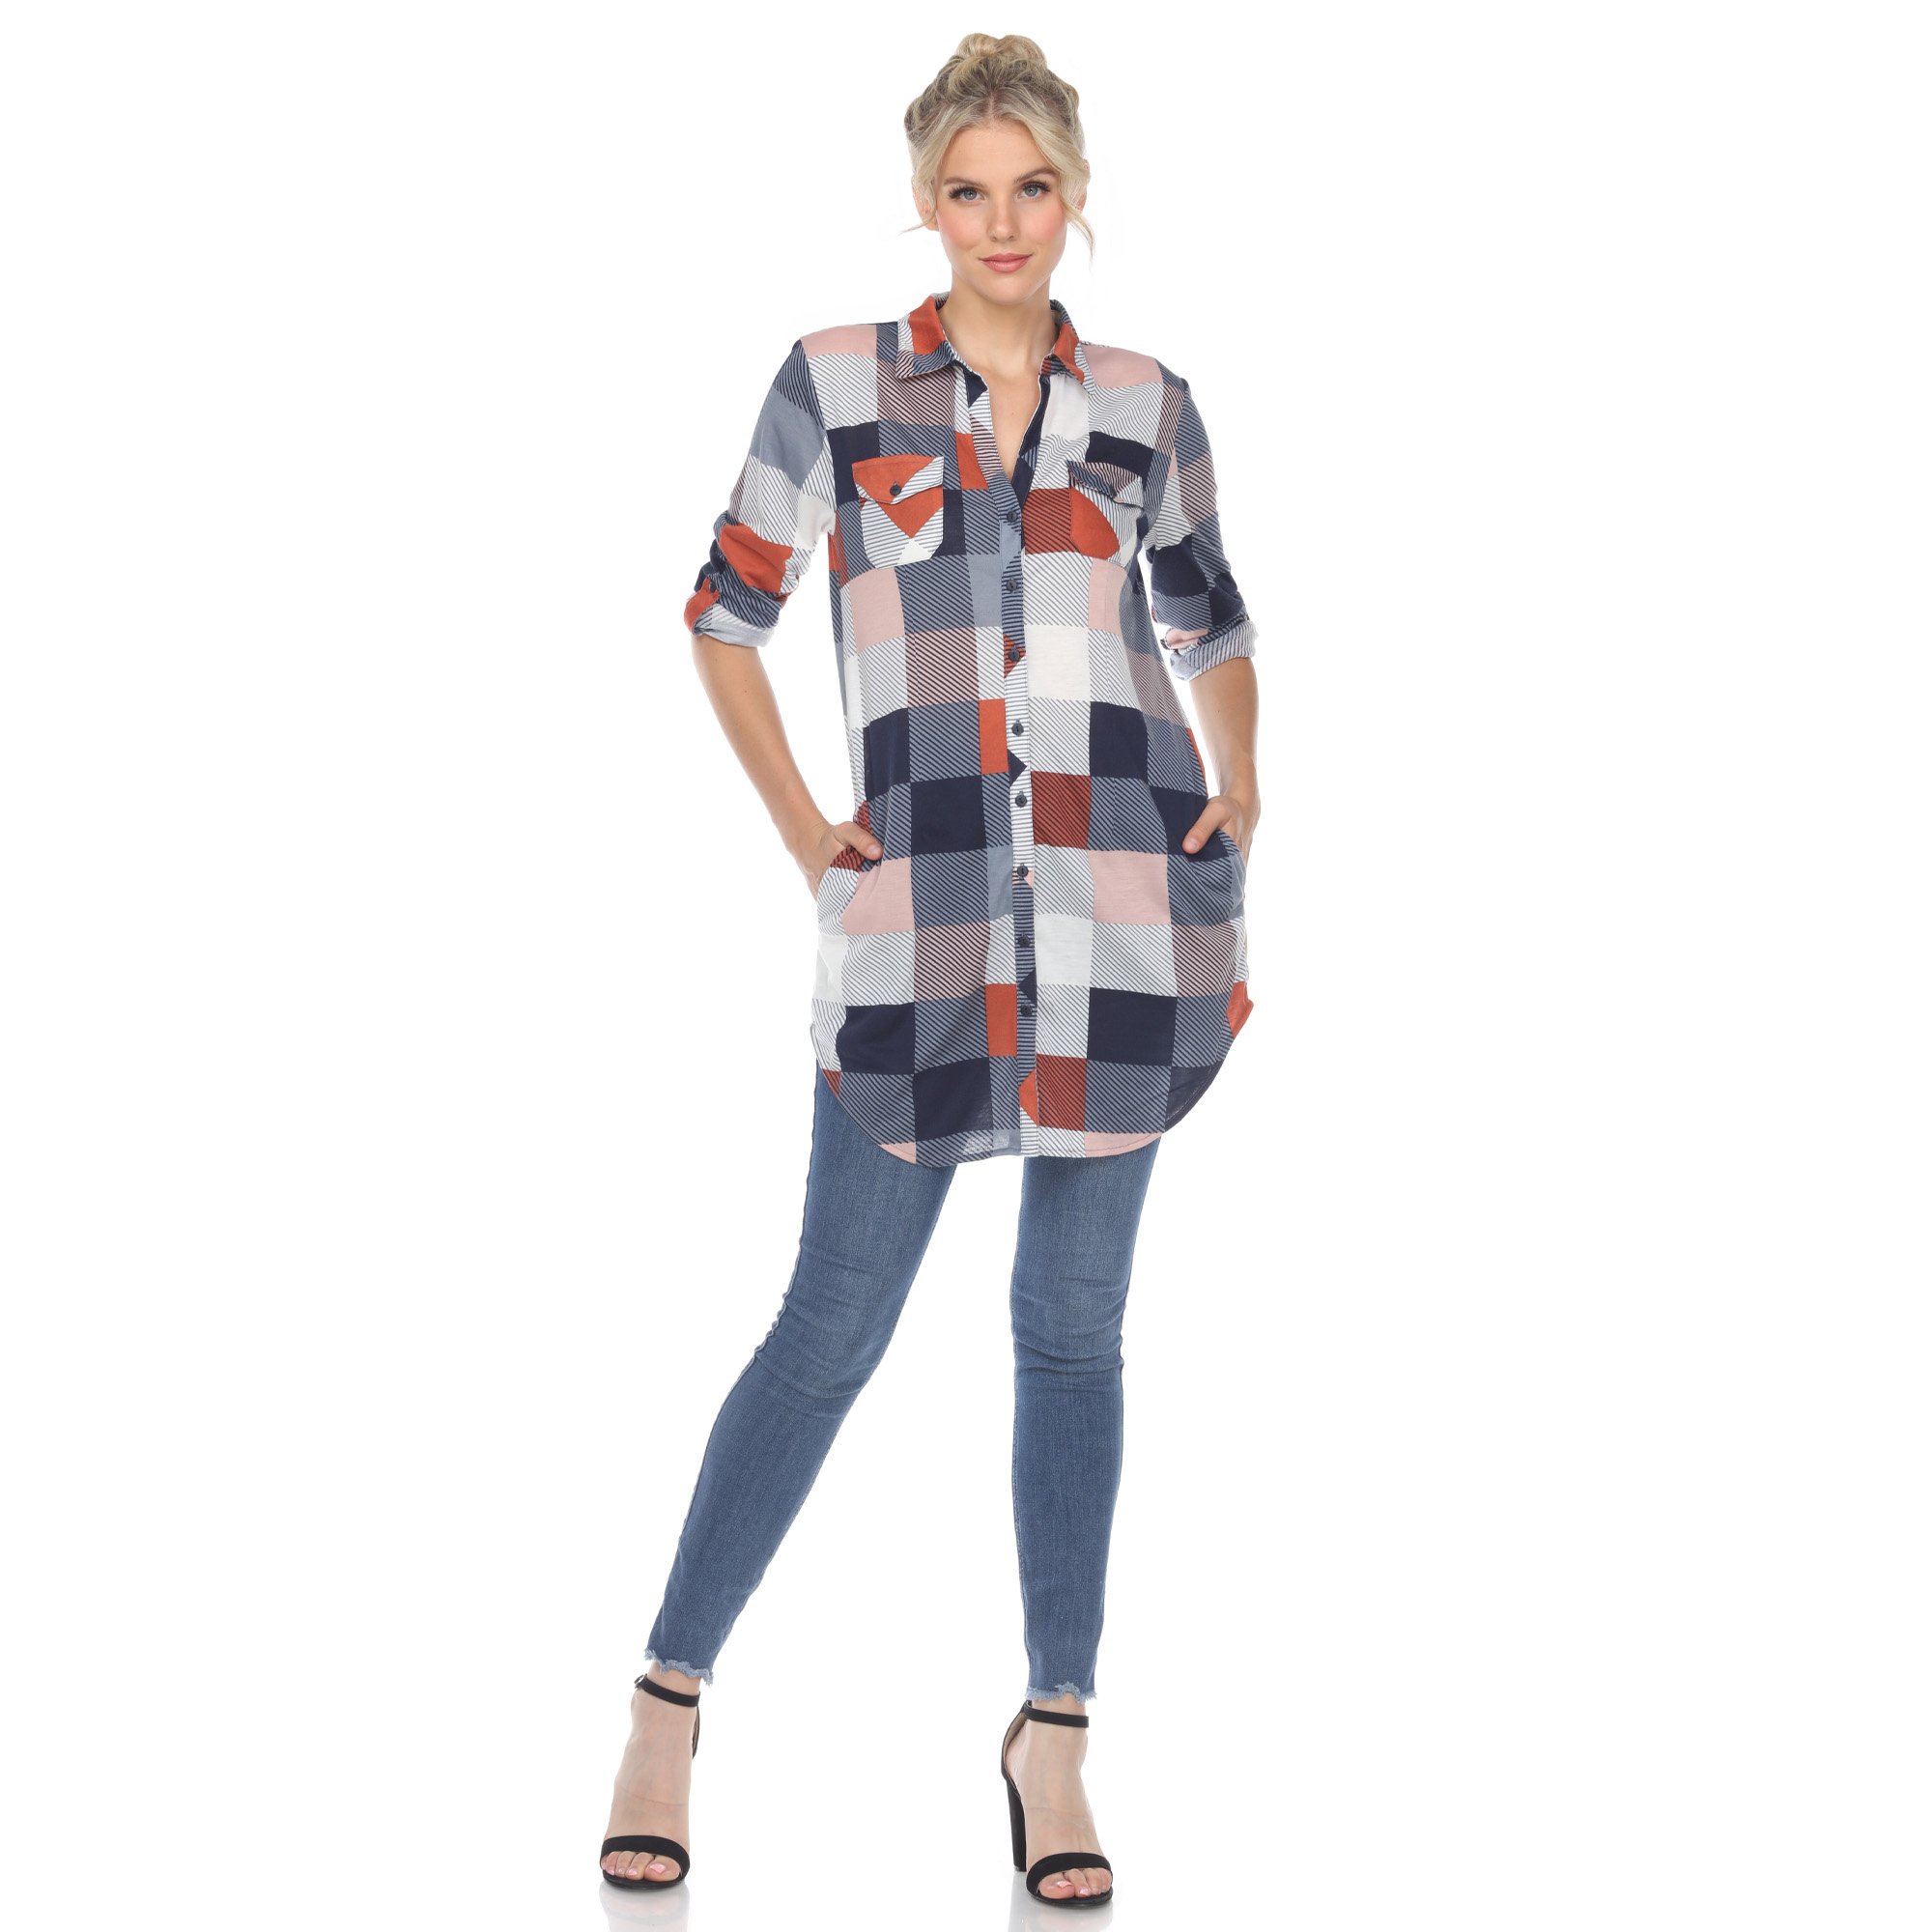 White Mark Women's Stretchy Buffalo Plaid Tunic Top - Blue/Brown, Small